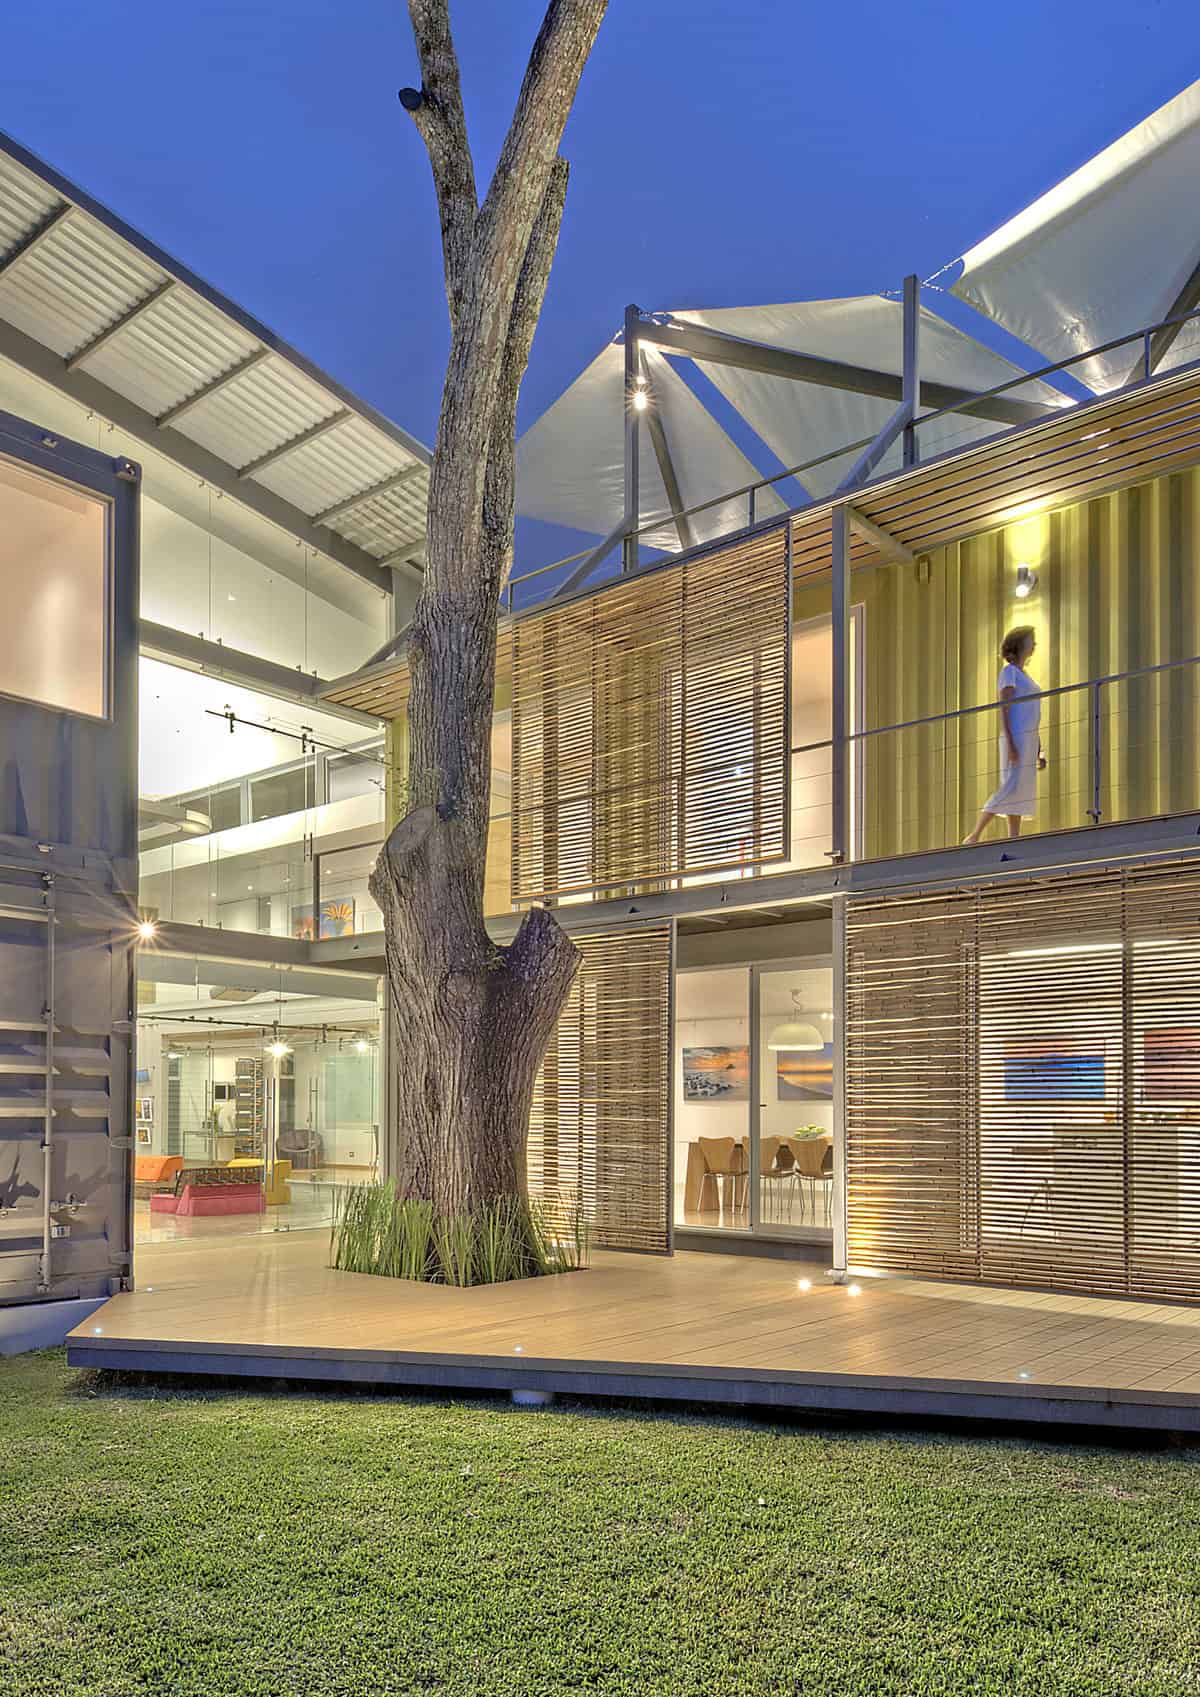 stunning-2-story-home-8-shipping-containers-13.jpg